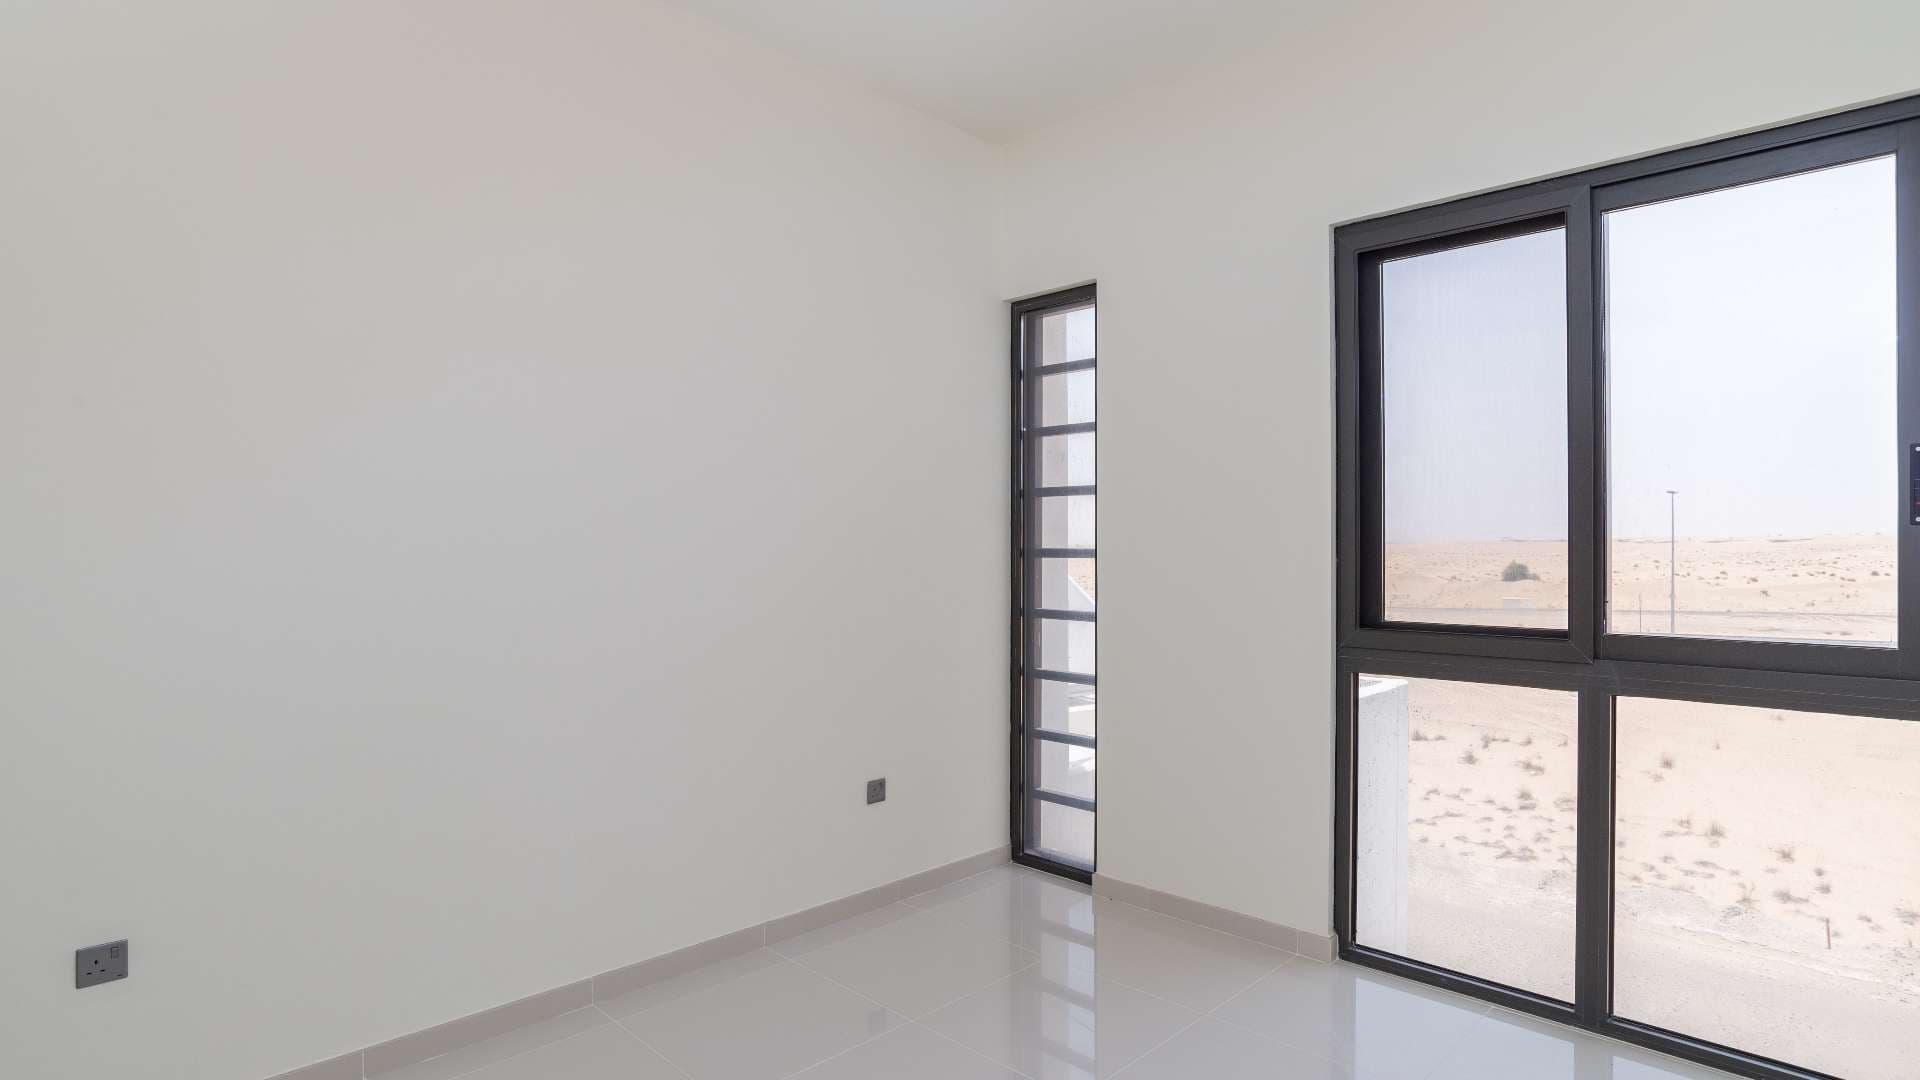 5 Bedroom Townhouse For Rent Aster Lp07689 43f8bc4e0265080.jpg